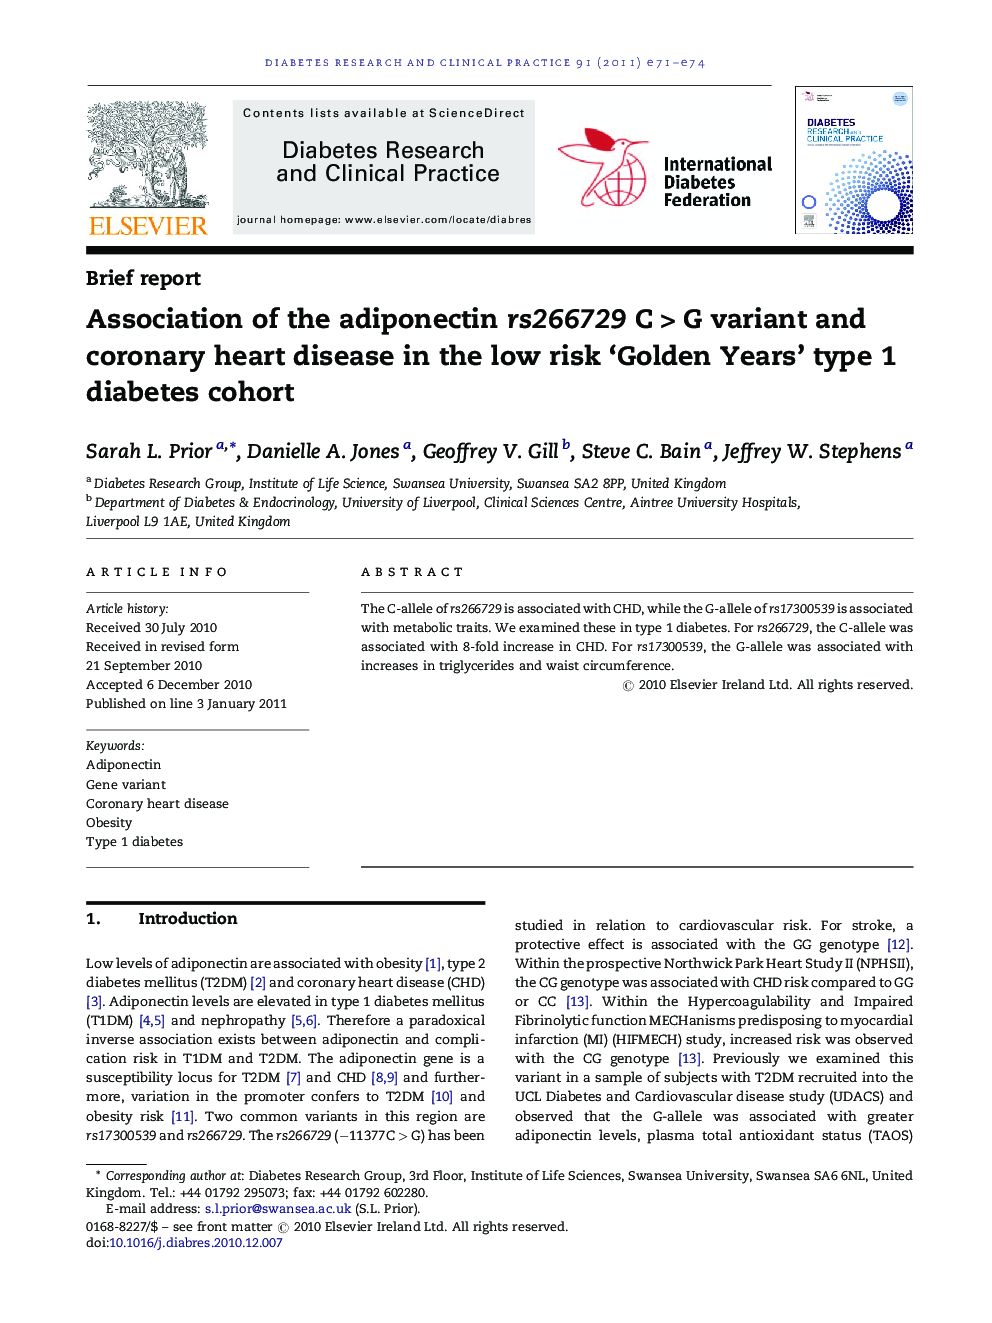 Association of the adiponectin rs266729 CÂ >Â G variant and coronary heart disease in the low risk 'Golden Years' type 1 diabetes cohort